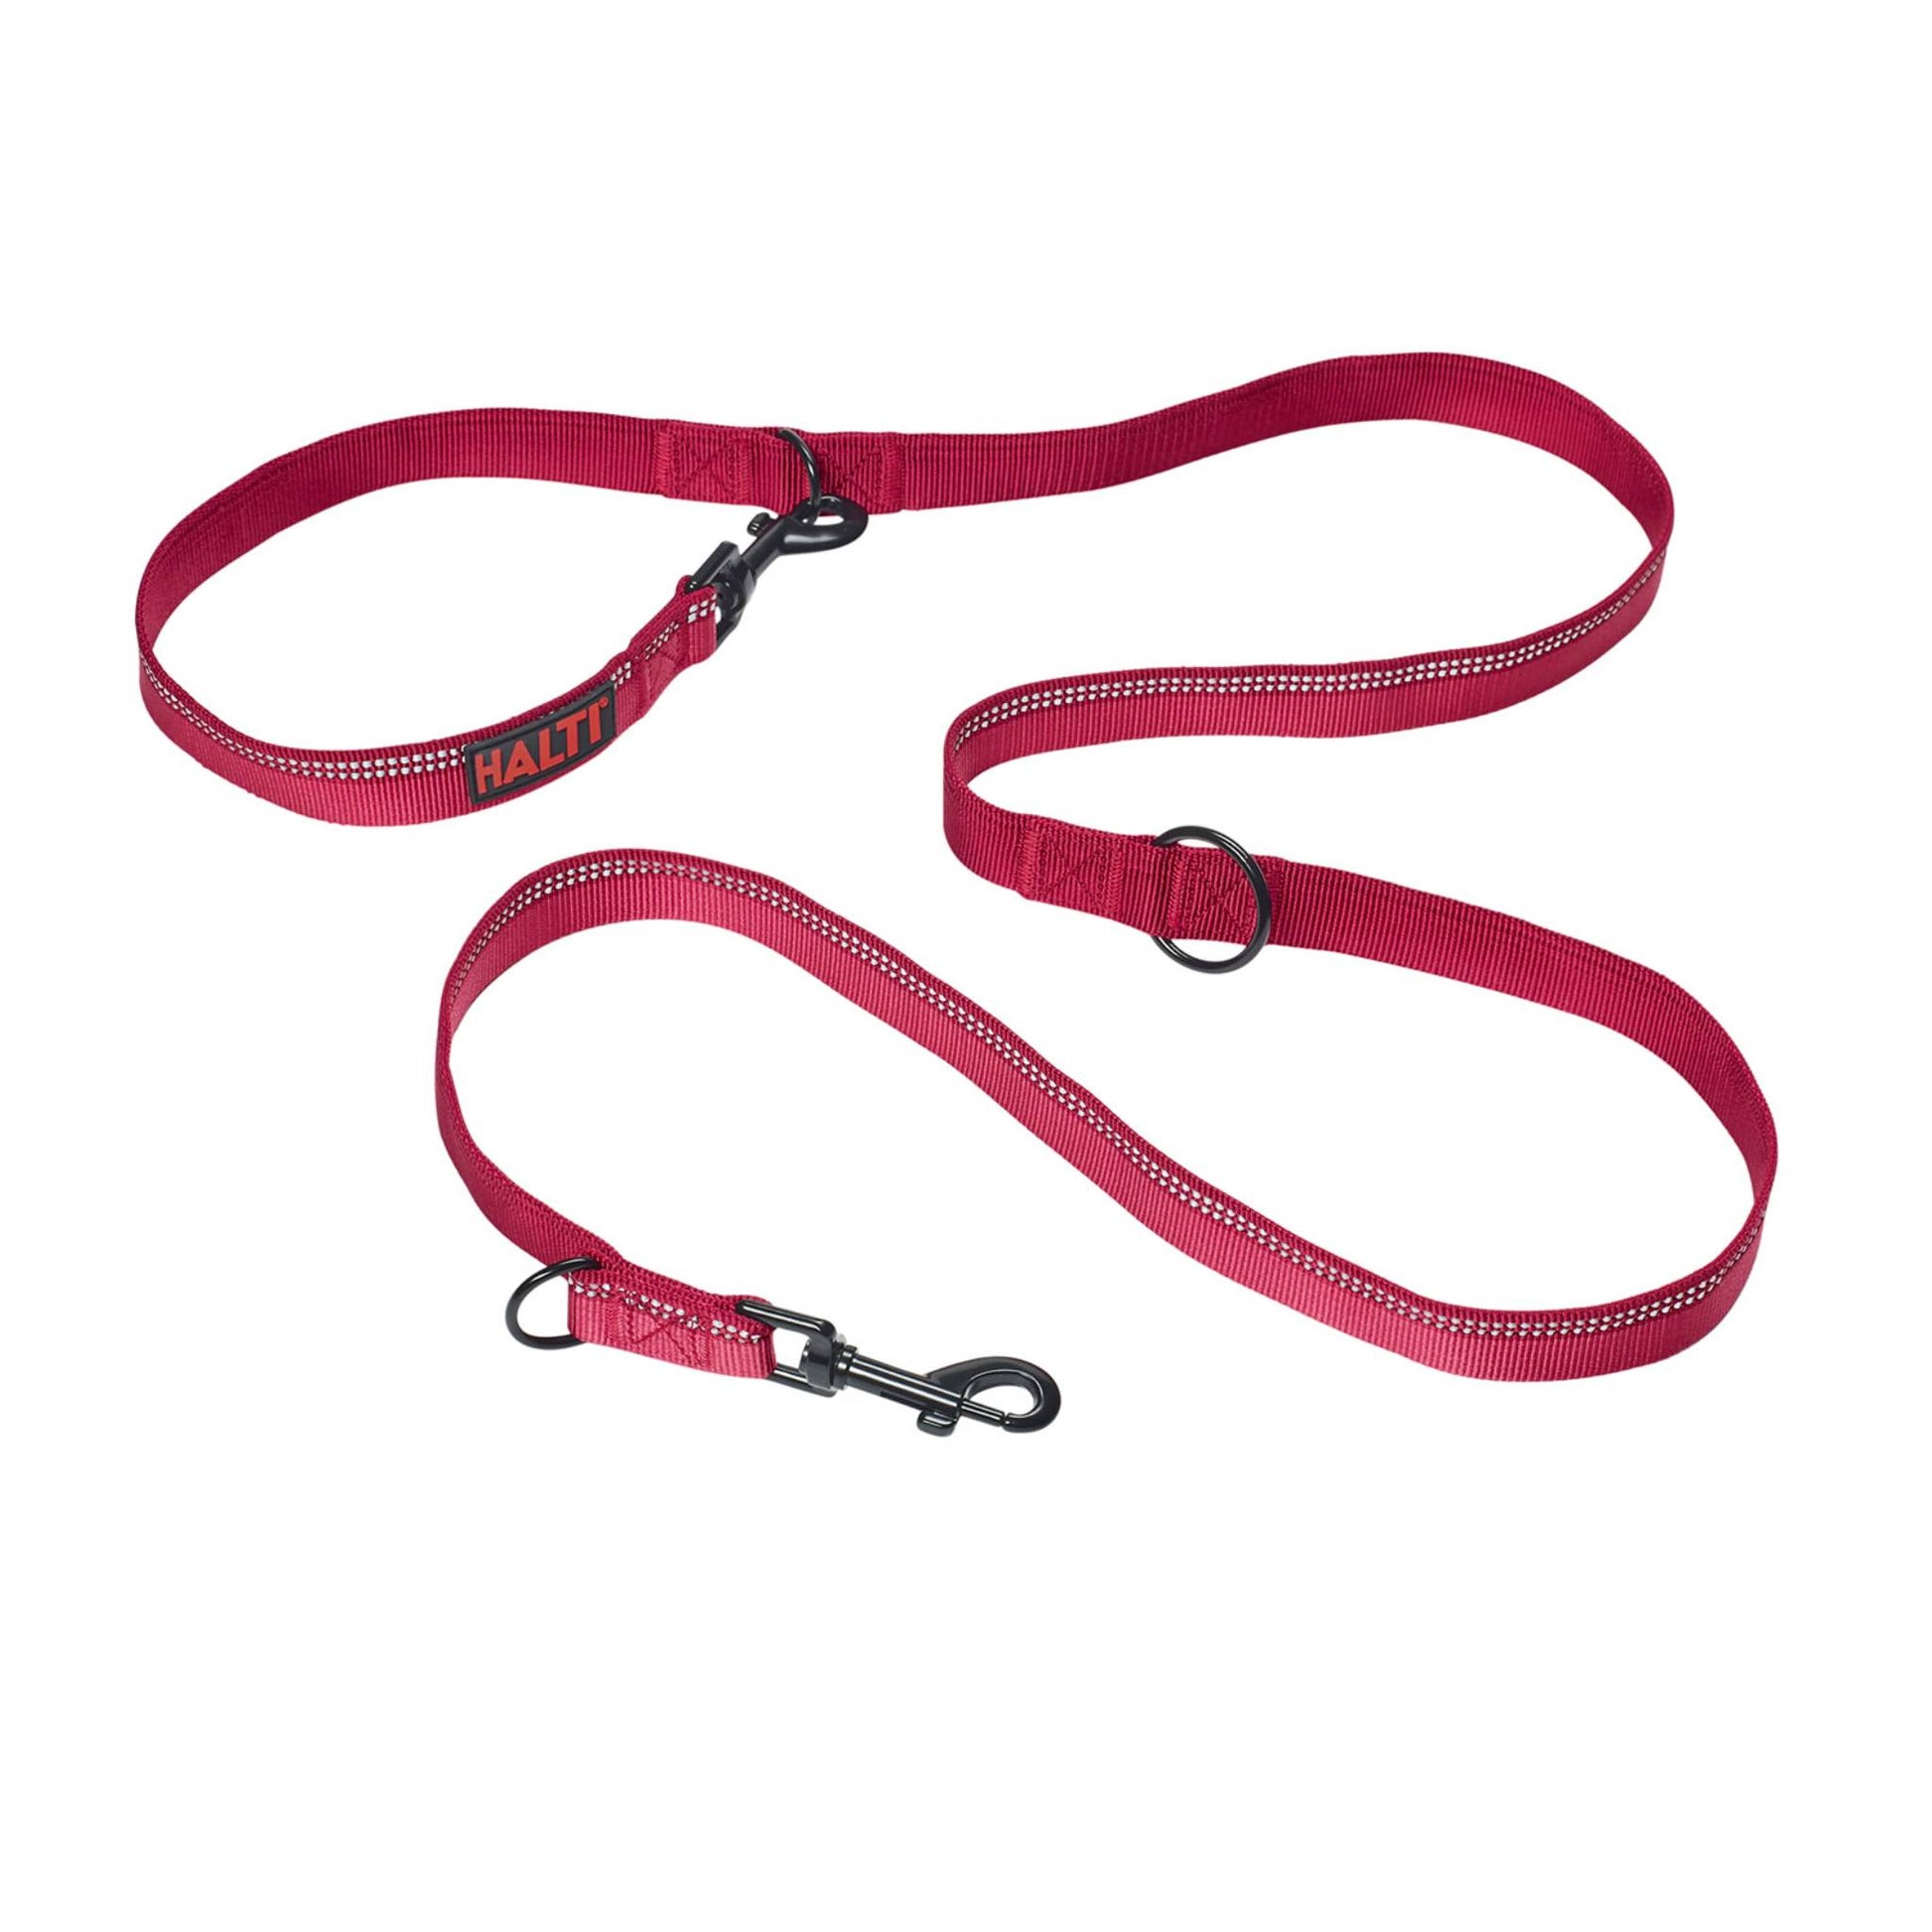 Halti double ended dog lead red